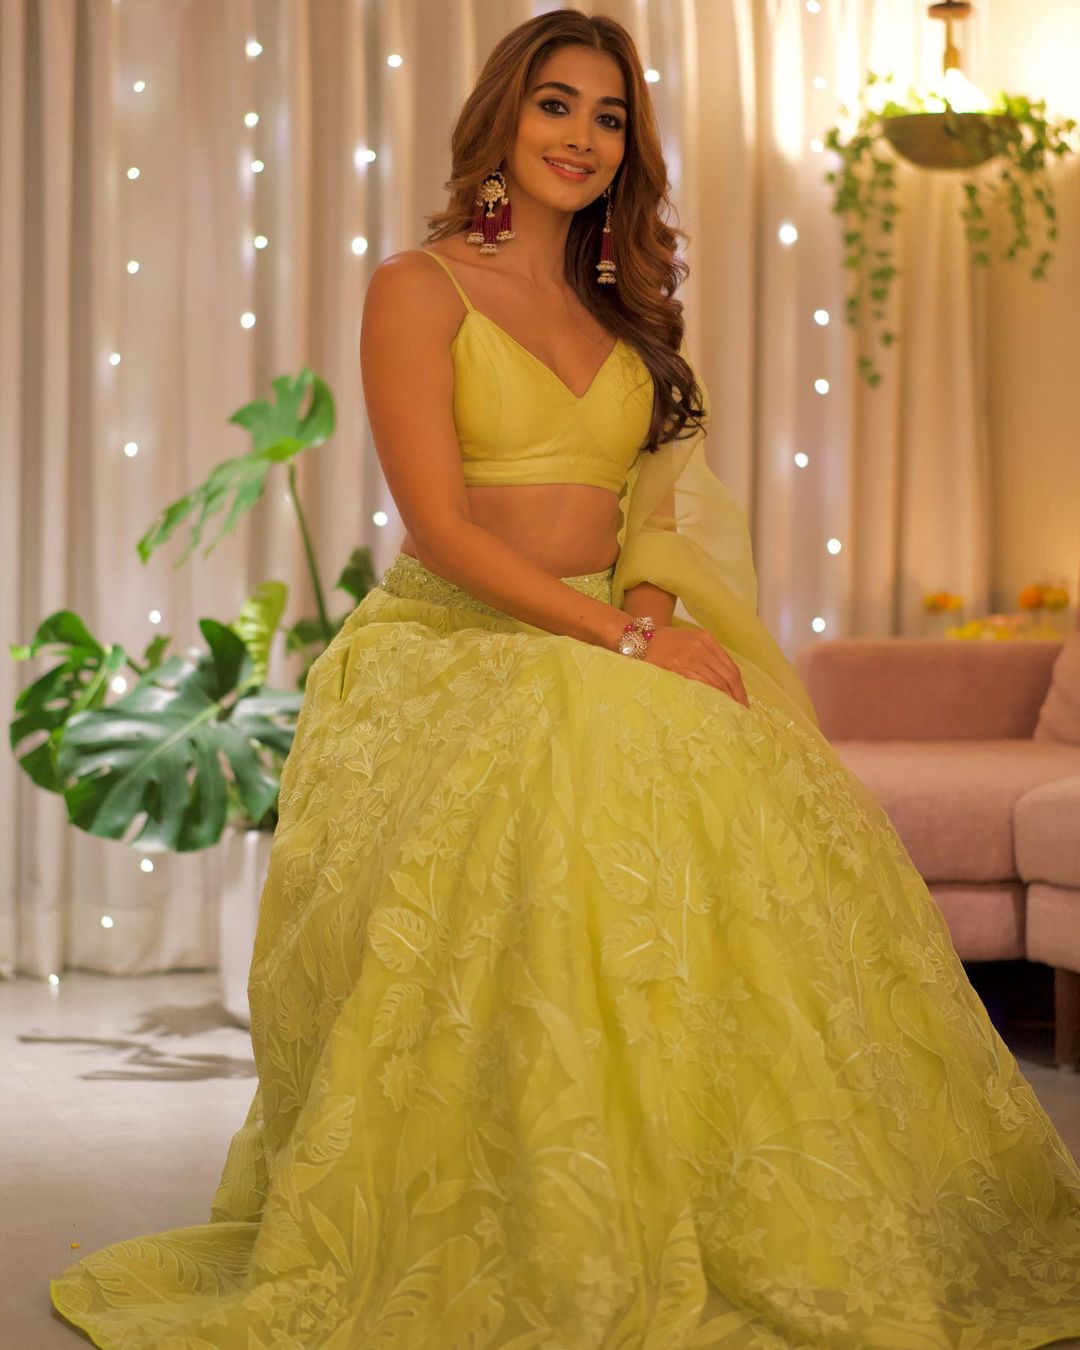 Pooja Hegde Spells Elegance In Lime Green Lehenga, Check Out The ...